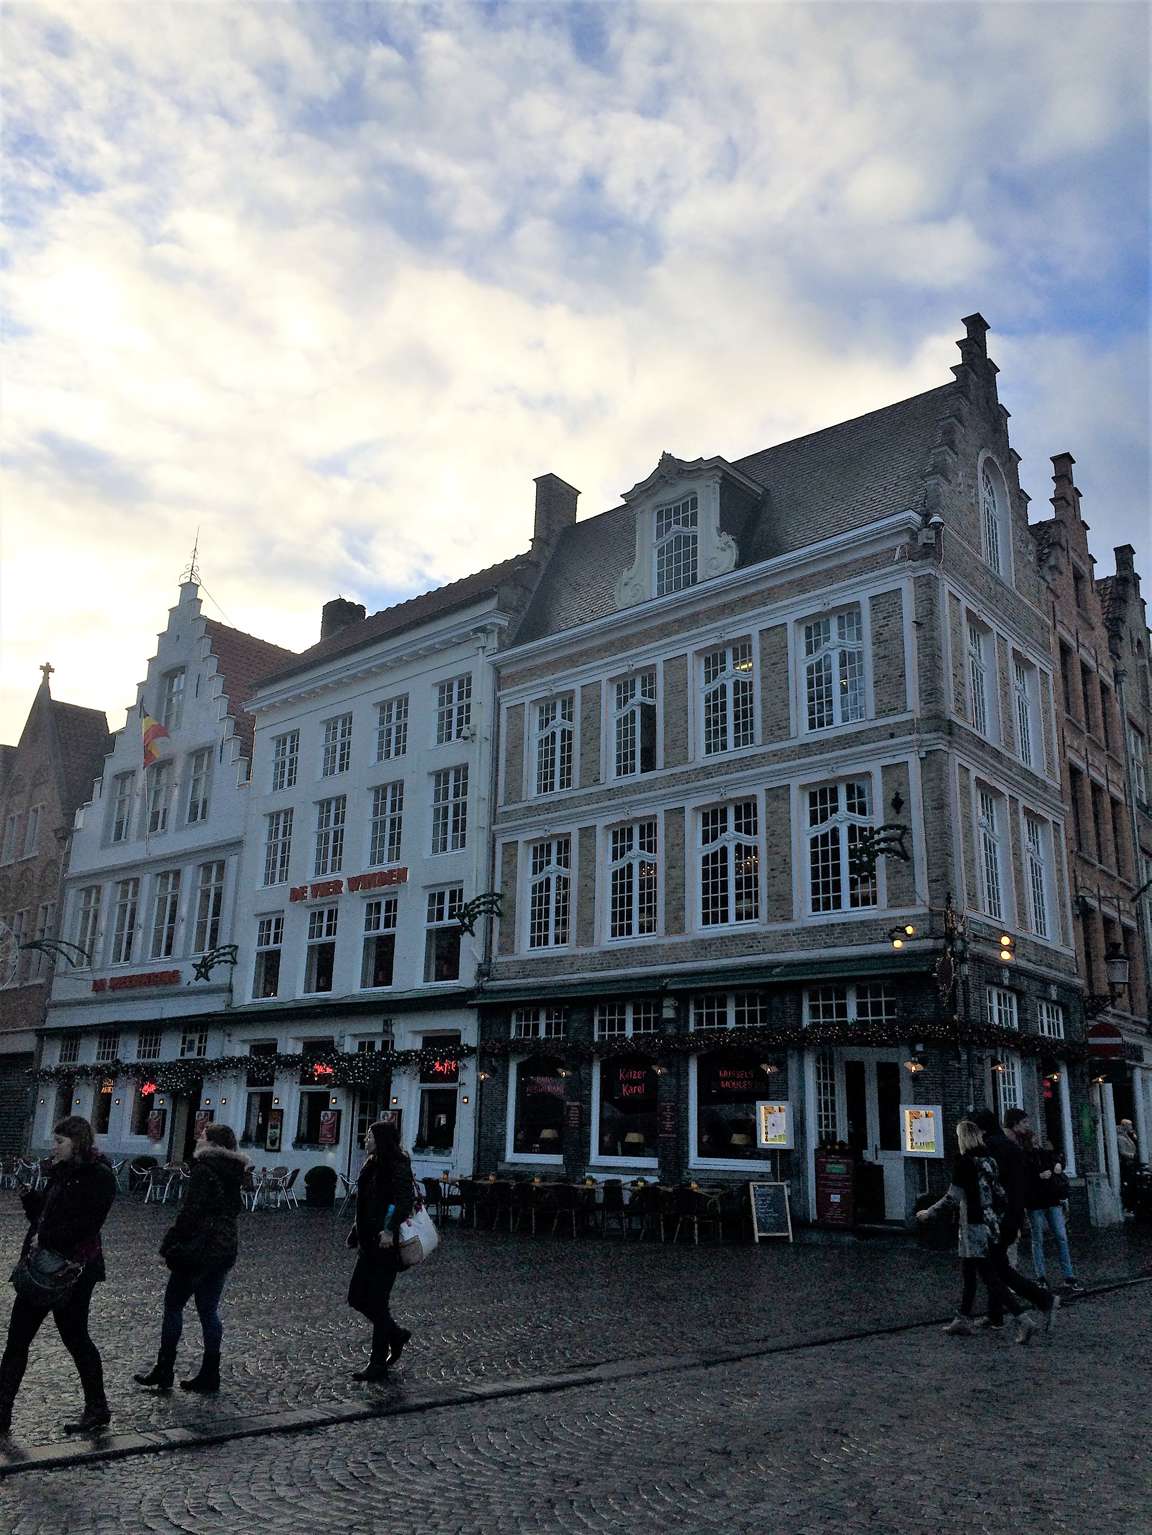 A picture of a street in Bruges, Belgium with gabled buildings and cobblestone streets.